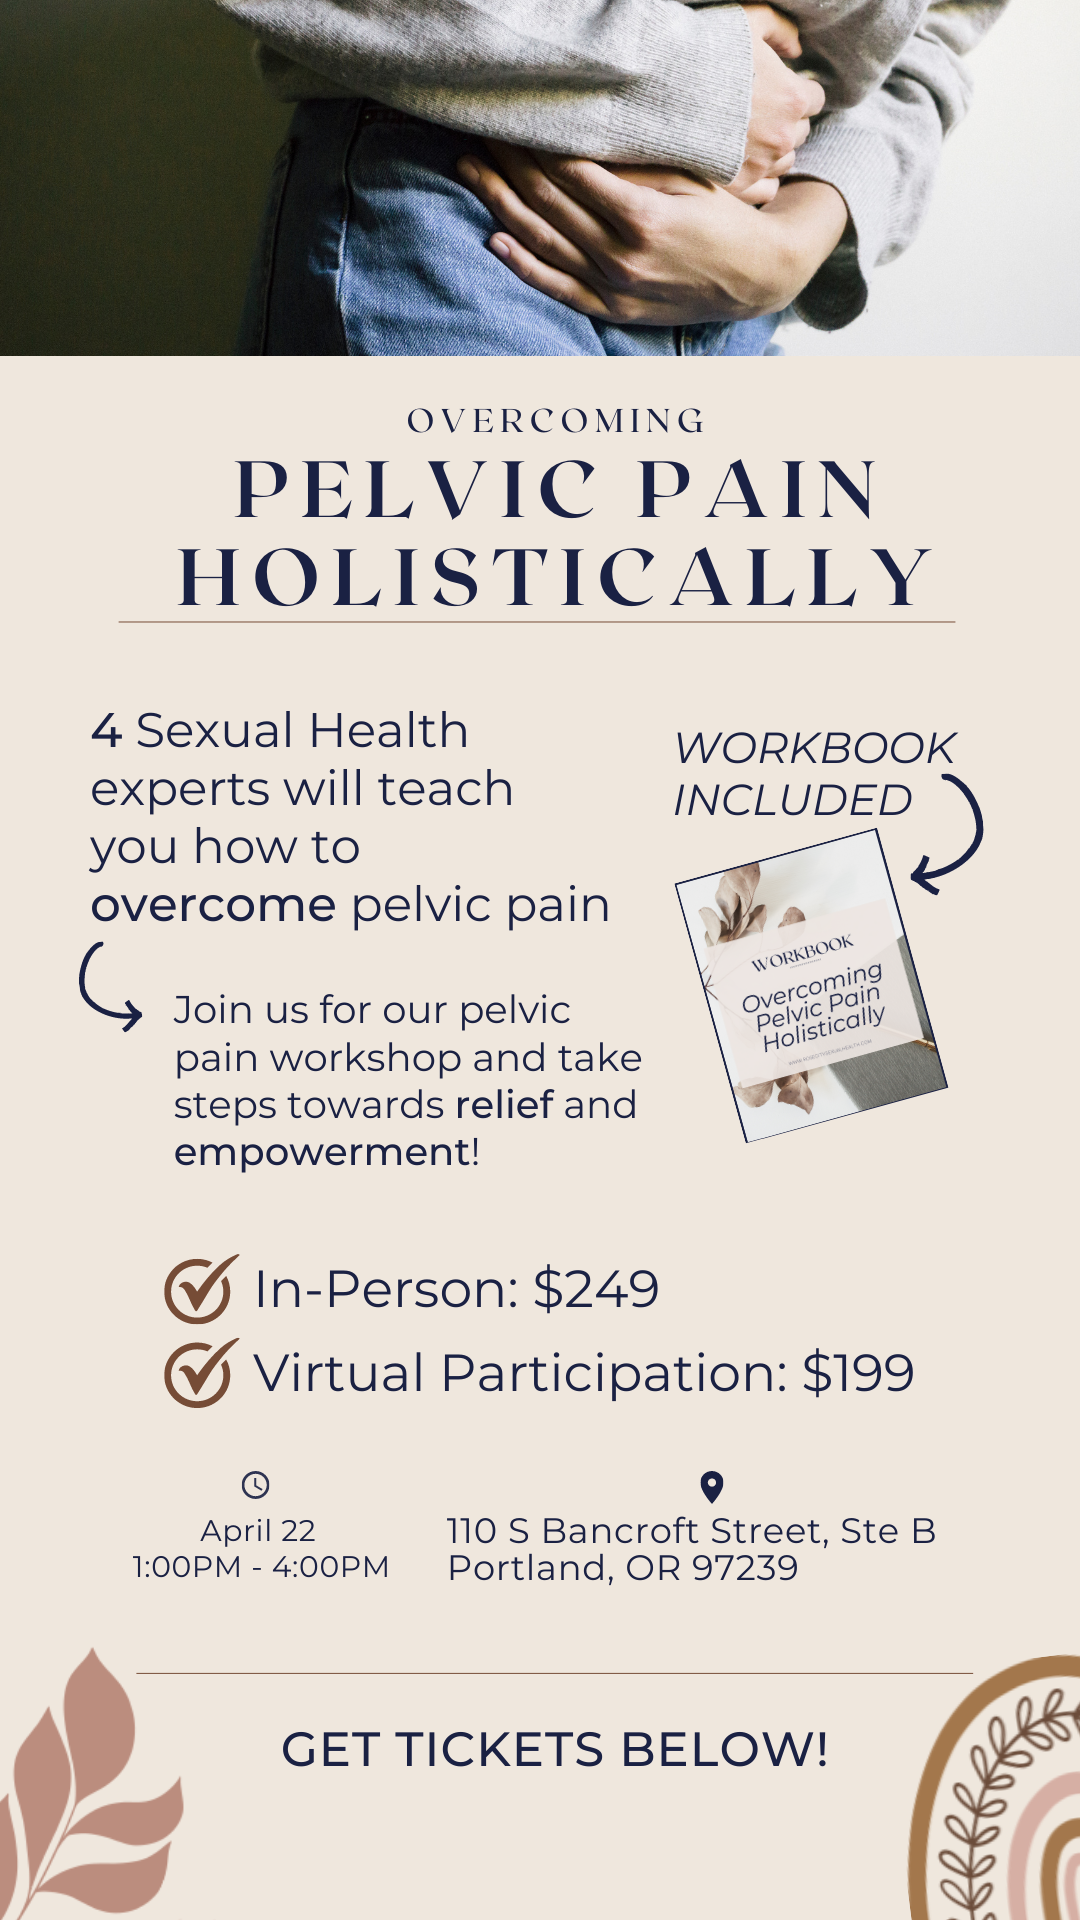 Overcoming Pelvic Pain Holistically - 4 Sexual Health experts will teach you how to overcome pelvic pain. Join us for our pelvic pain workshop and take steps towards relief and empowerment!